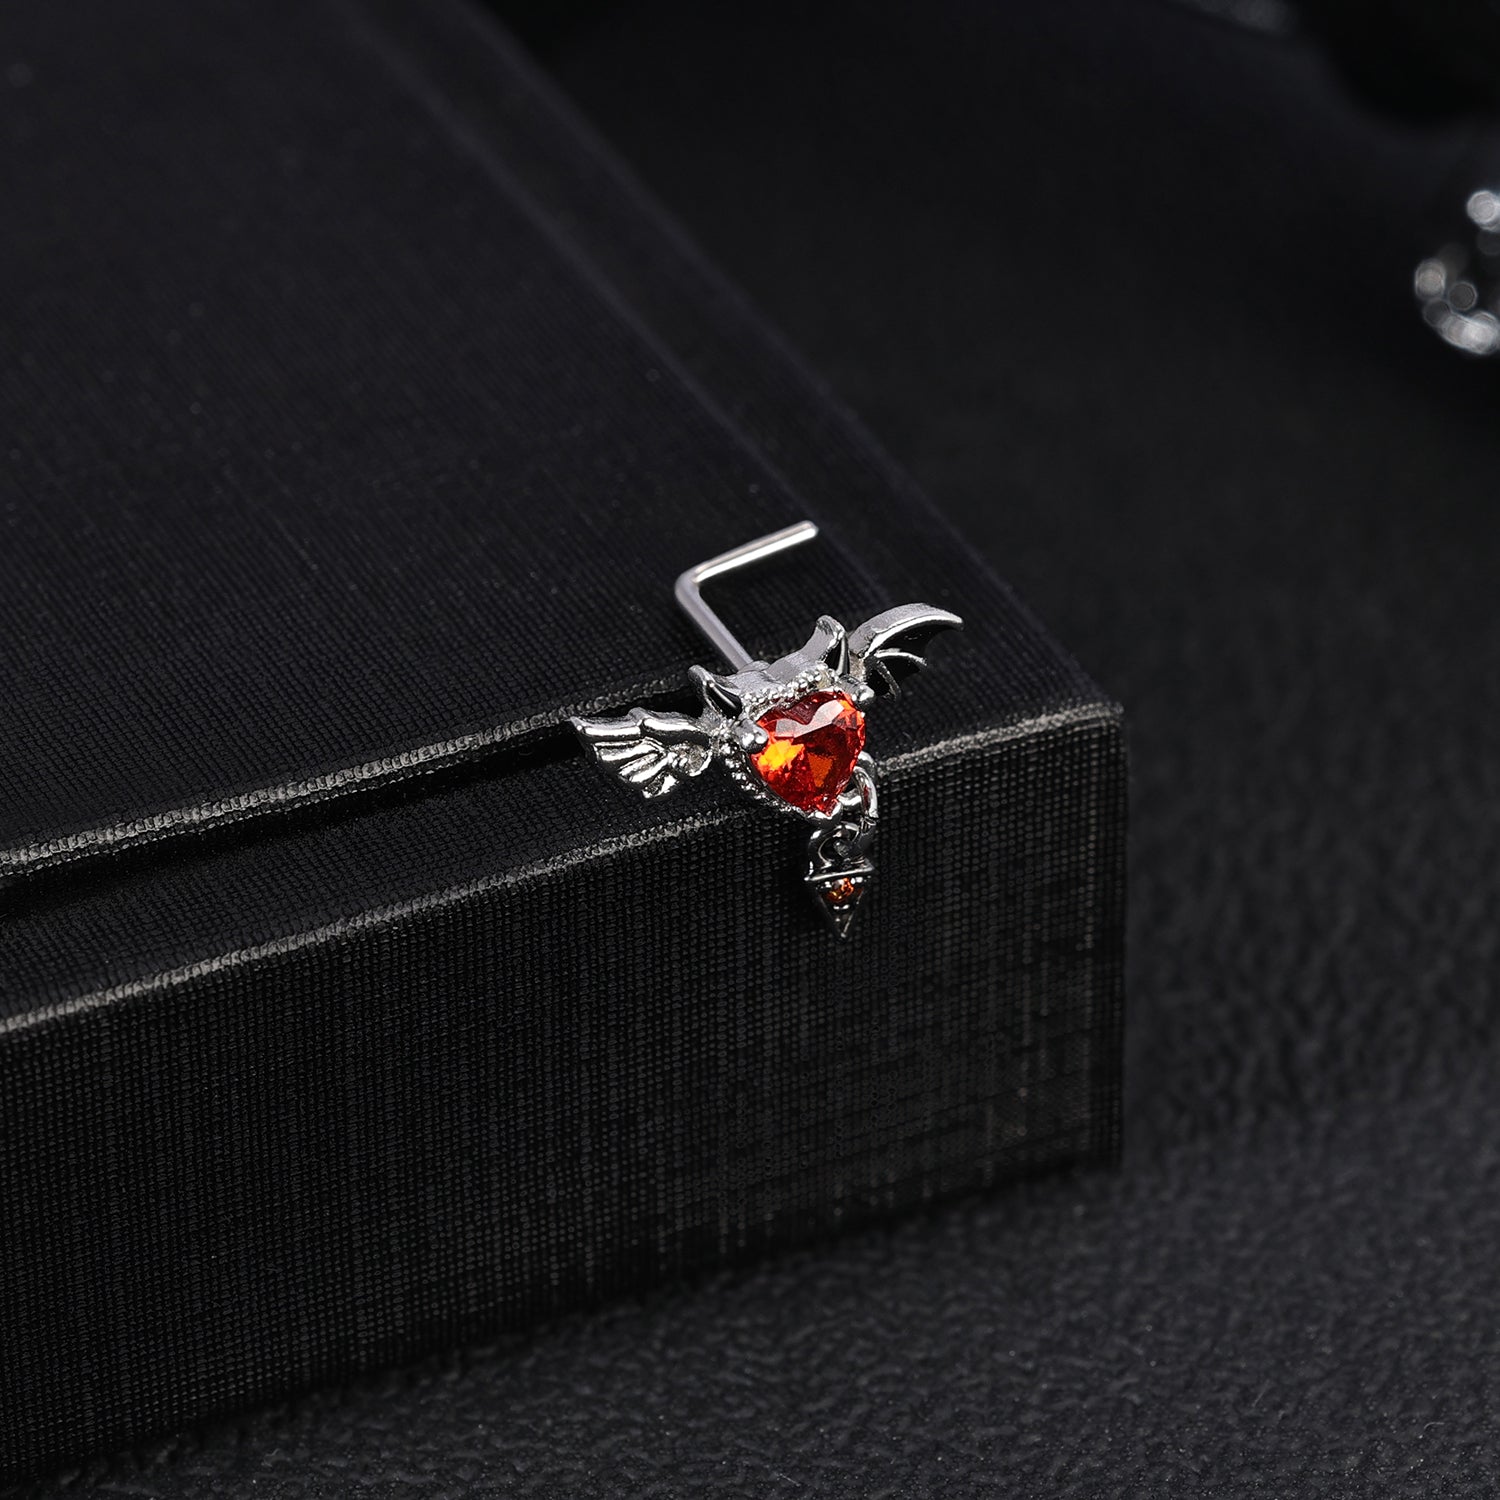 20G Devil Wings Nose Studs Piercing L Shape Nose Rings Red Zirconia Nostril Piercing